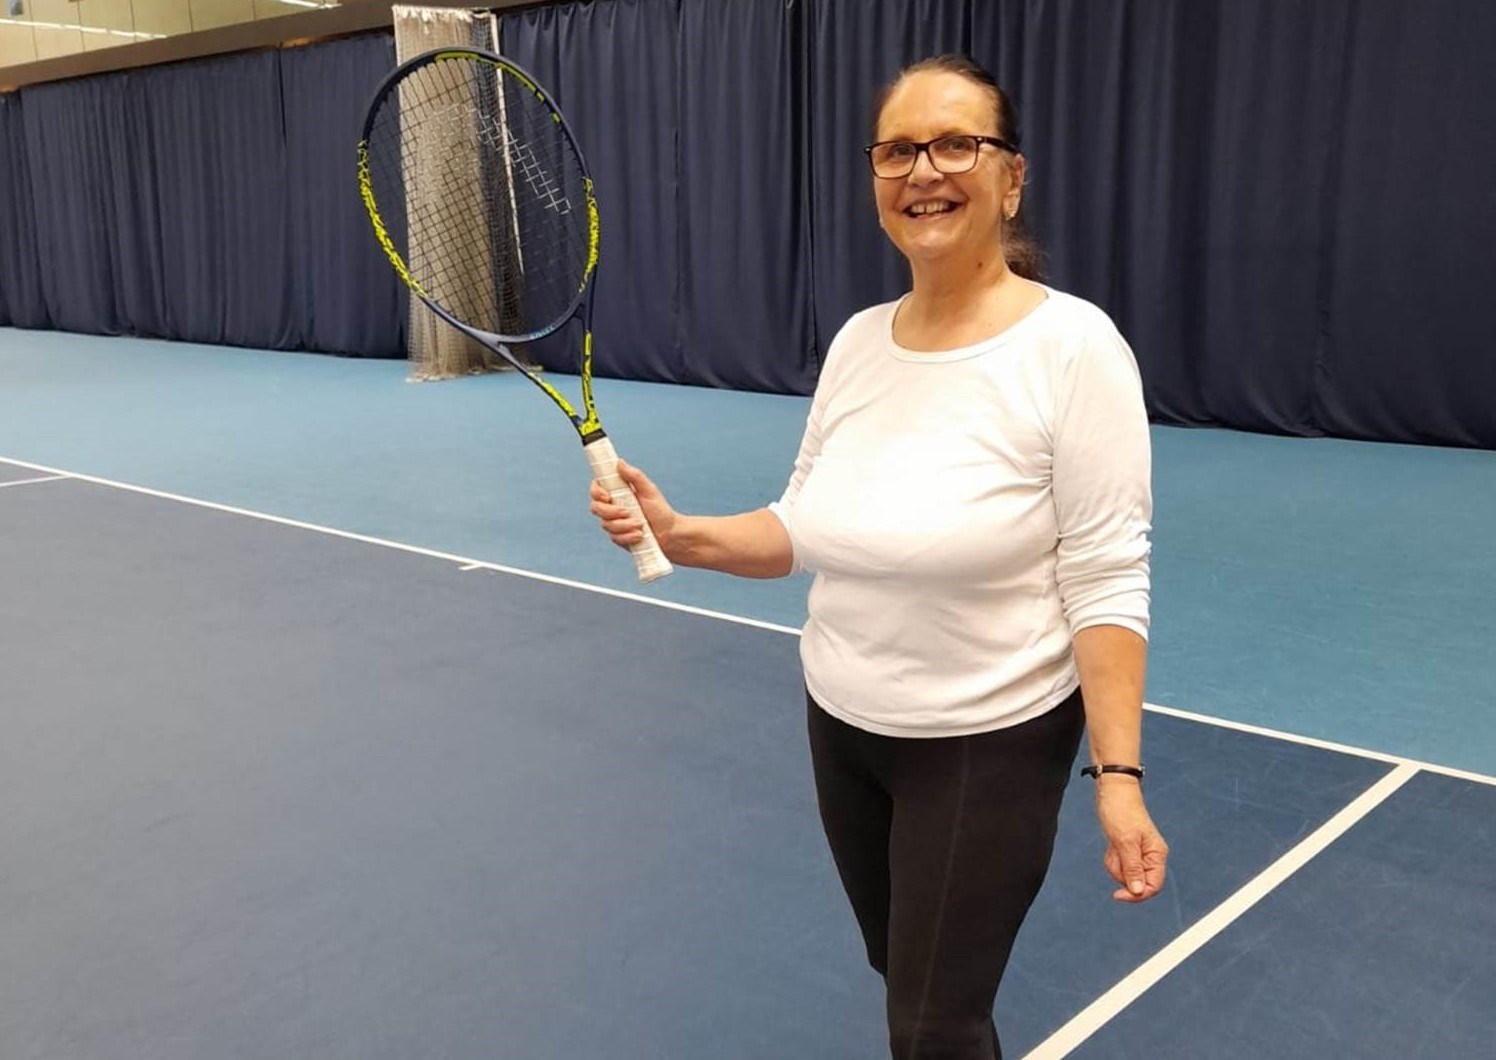 Tennis player holding a racket at the Lee Valley Tennis Centre